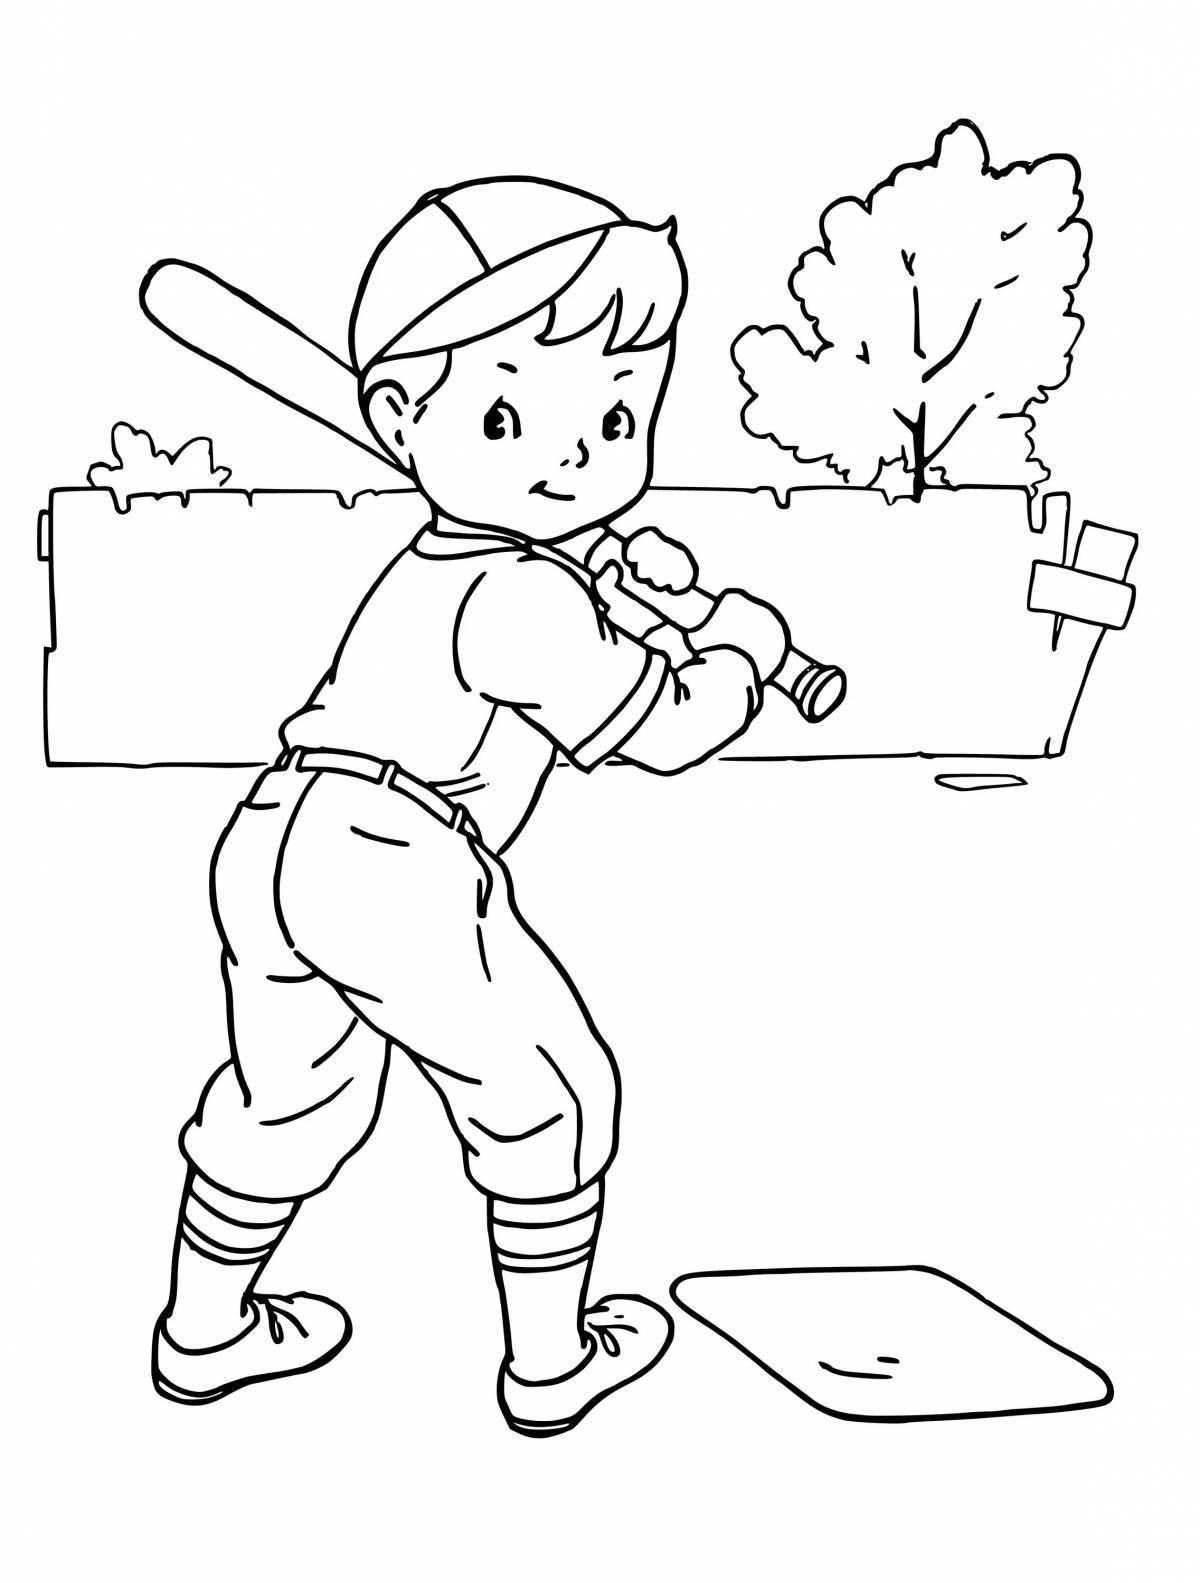 Animated sports coloring pages for kids